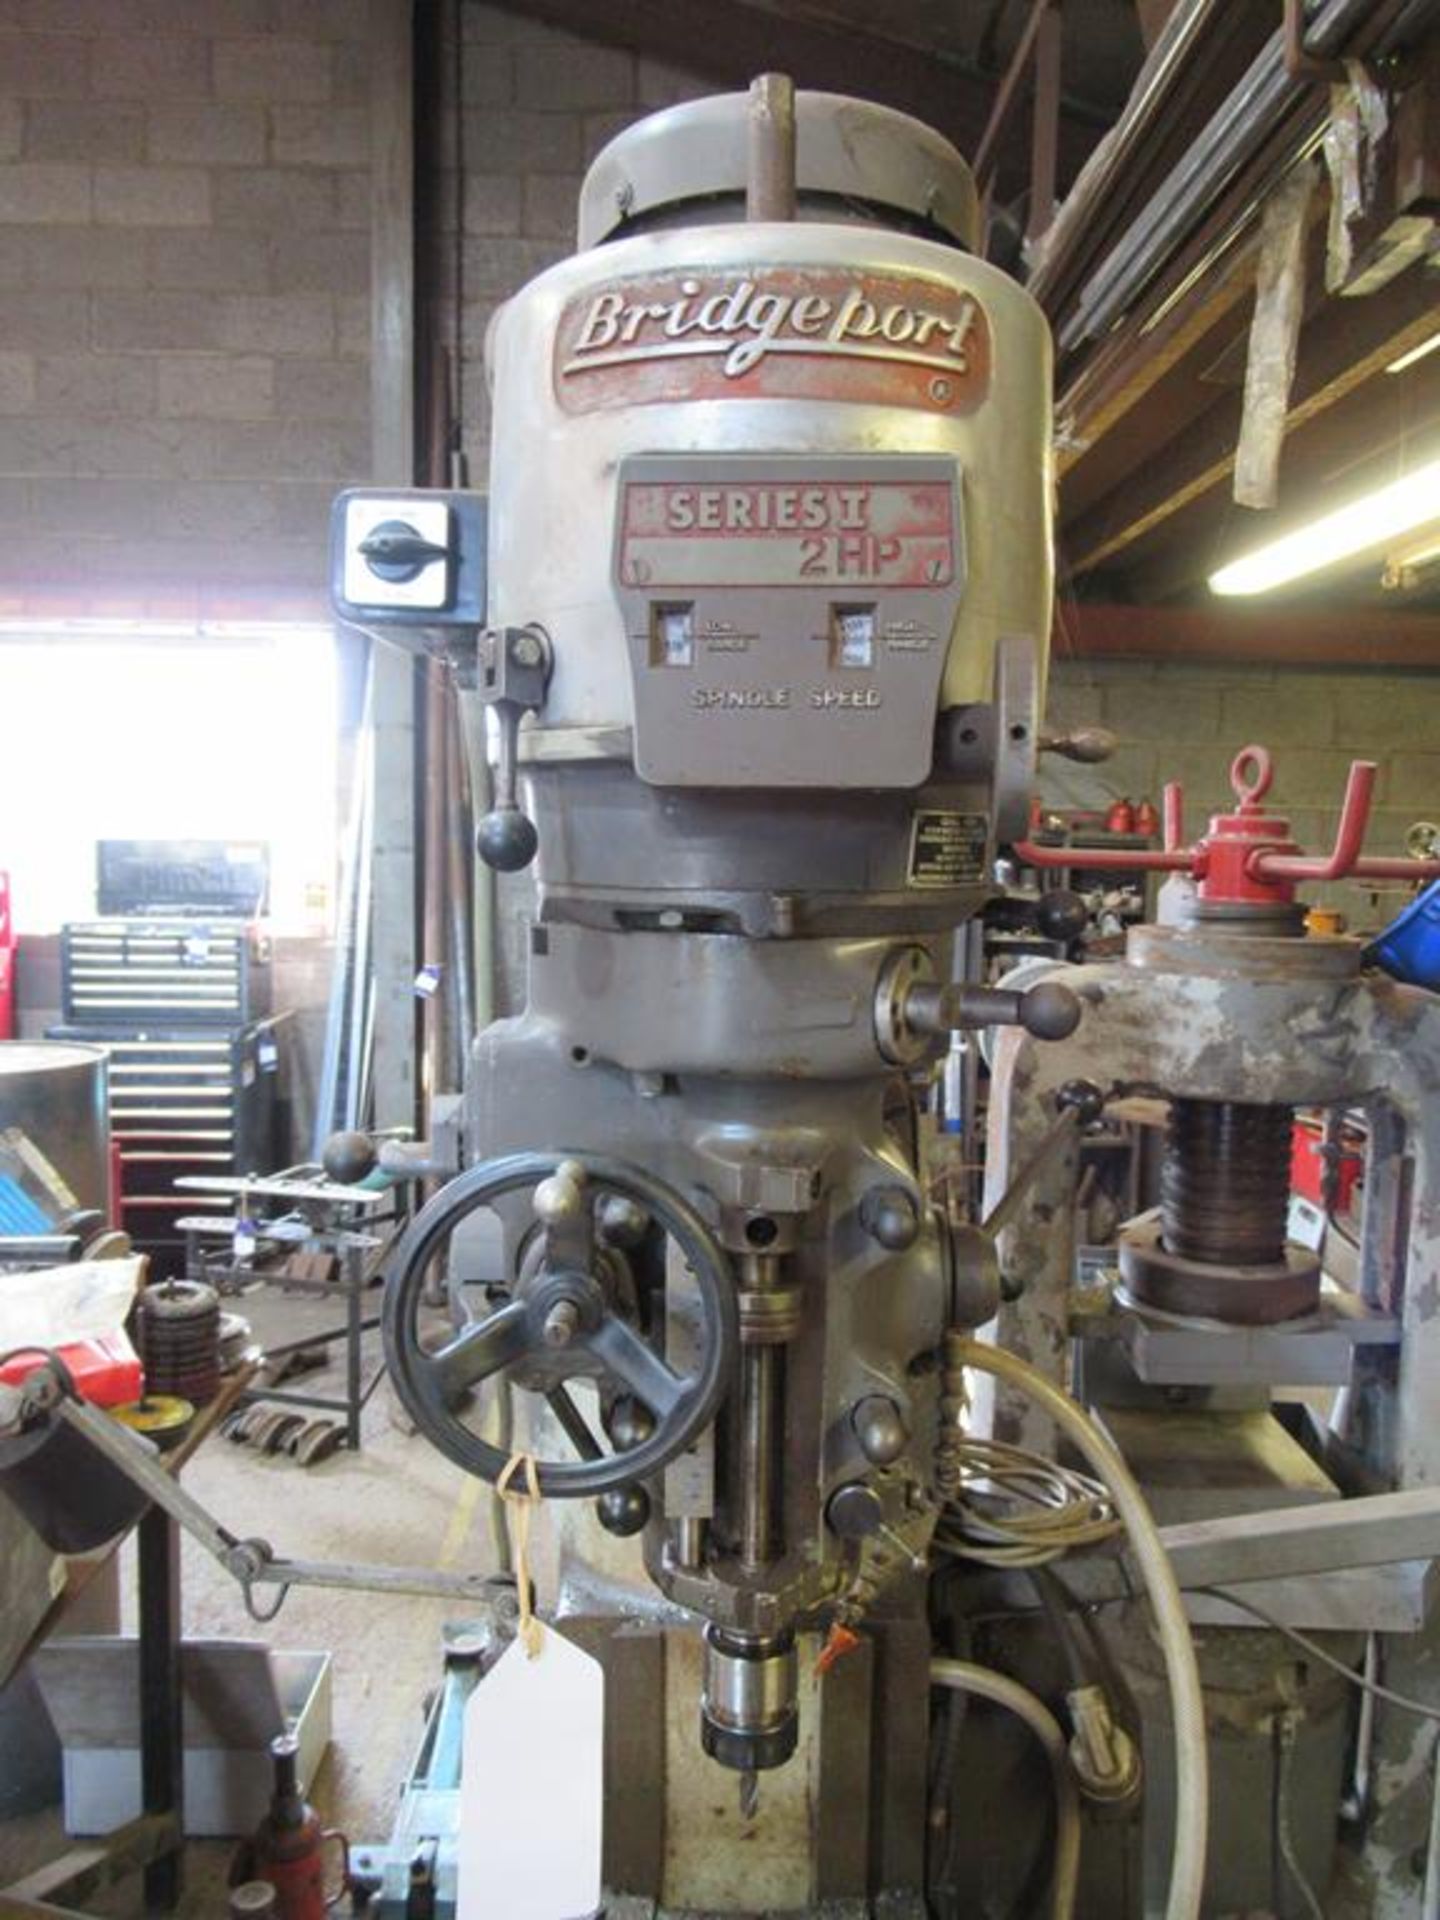 Bridgeport series I 2HP turret mill with shaping attachment, power feed and two axis Dro - Image 3 of 9